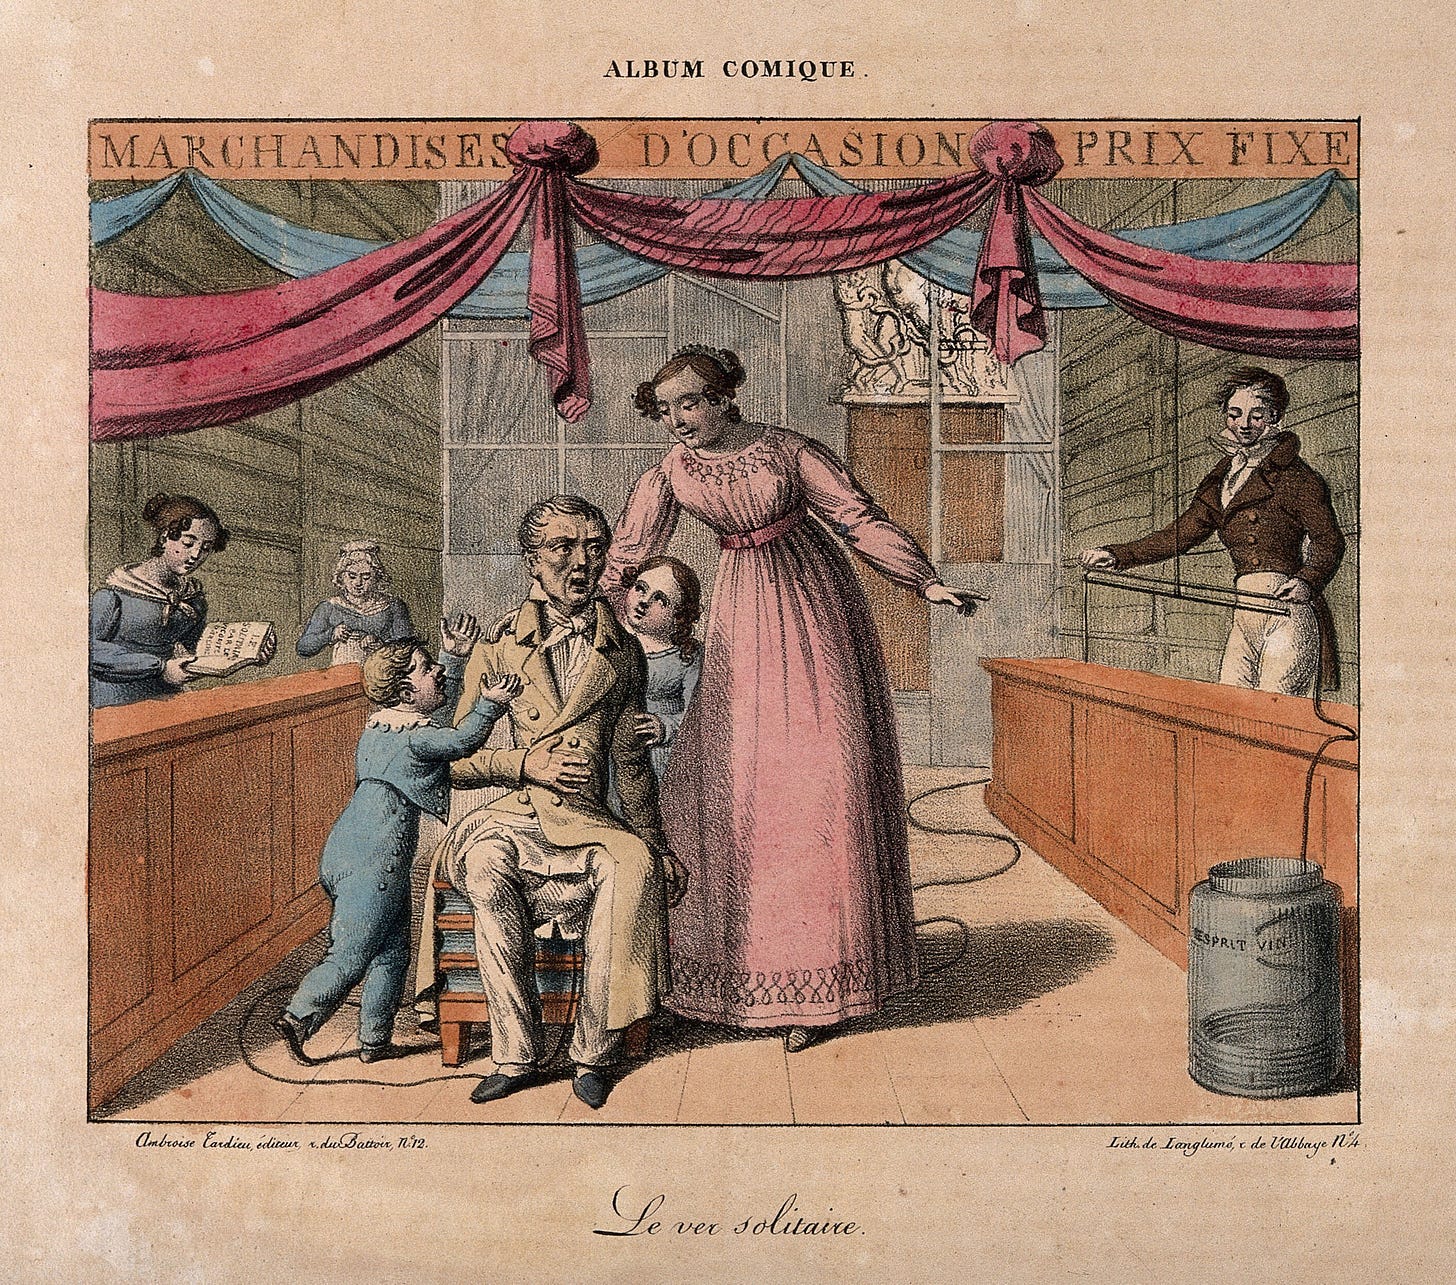 A 19thC lithograph showing a sick-looking man sitting on a commode. He is being pestered by two children, and a woman stands nearby, talking to him and pointing towards another man on the right of the image. This man is using a long ruler to measure sections of a tapeworm that originates in the region of the commode – the implication being that it is coming from the patient’s bottom. Once measured, the tapeworm is being coiled into a large jar of spirits on the floor. 